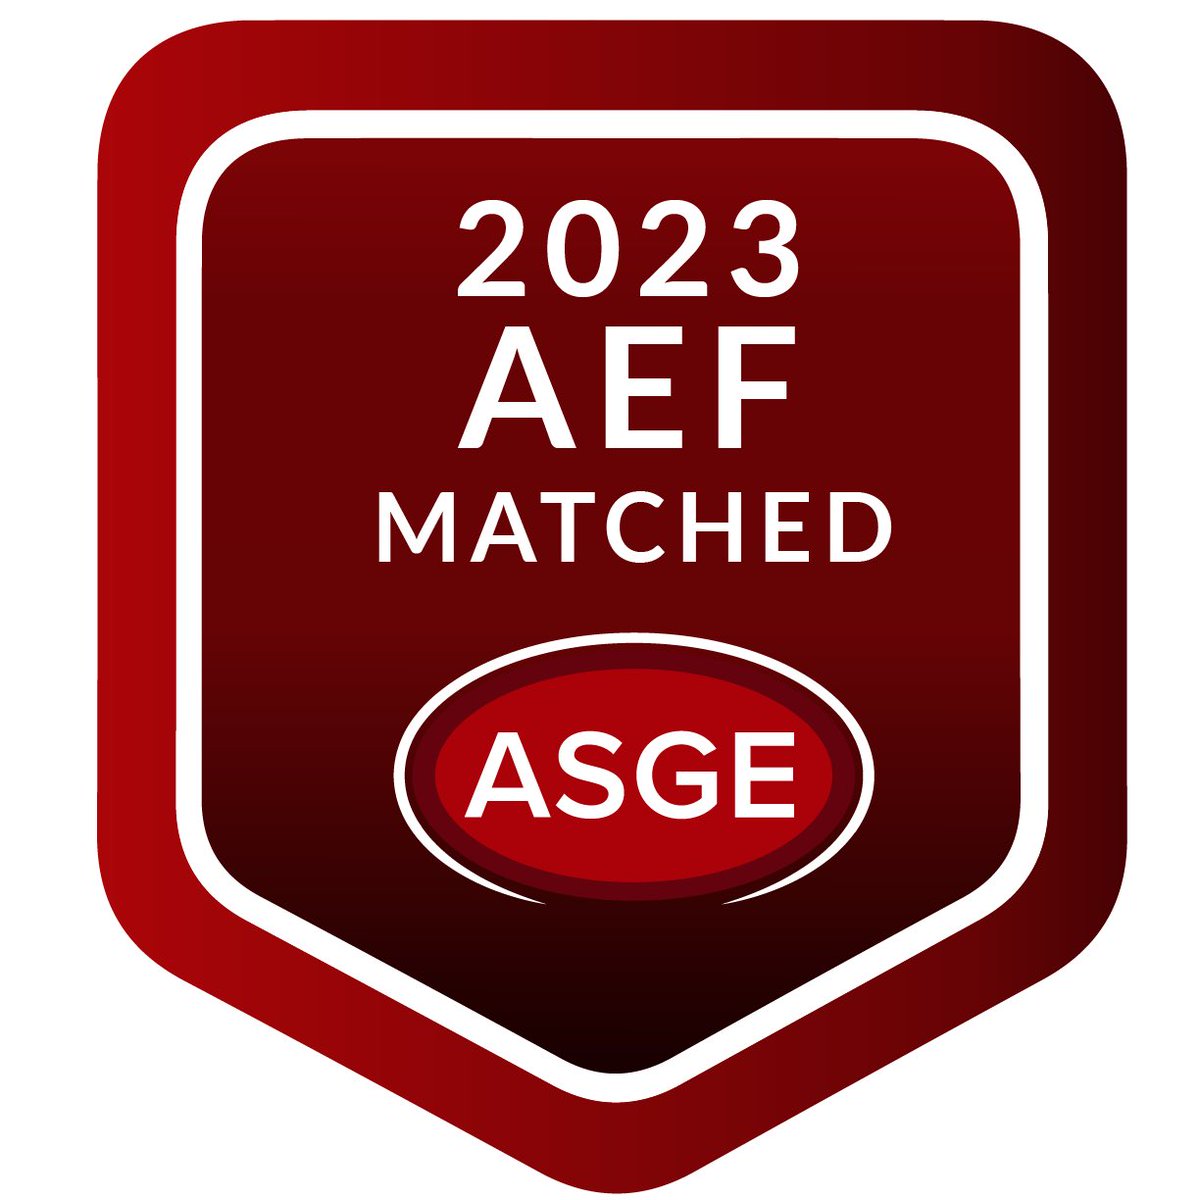 We are excited to announce our Advanced Endoscopy Fellow match results. Our incoming fellows are our current Chief Fellow Dr. Peter Sullivan and Dr. Shiva Poola @ShivaPoola from ECU/Brady school of Medicine @AGA_Gastro @ASGEendoscopy @AmerGastroAssn #GITwitter